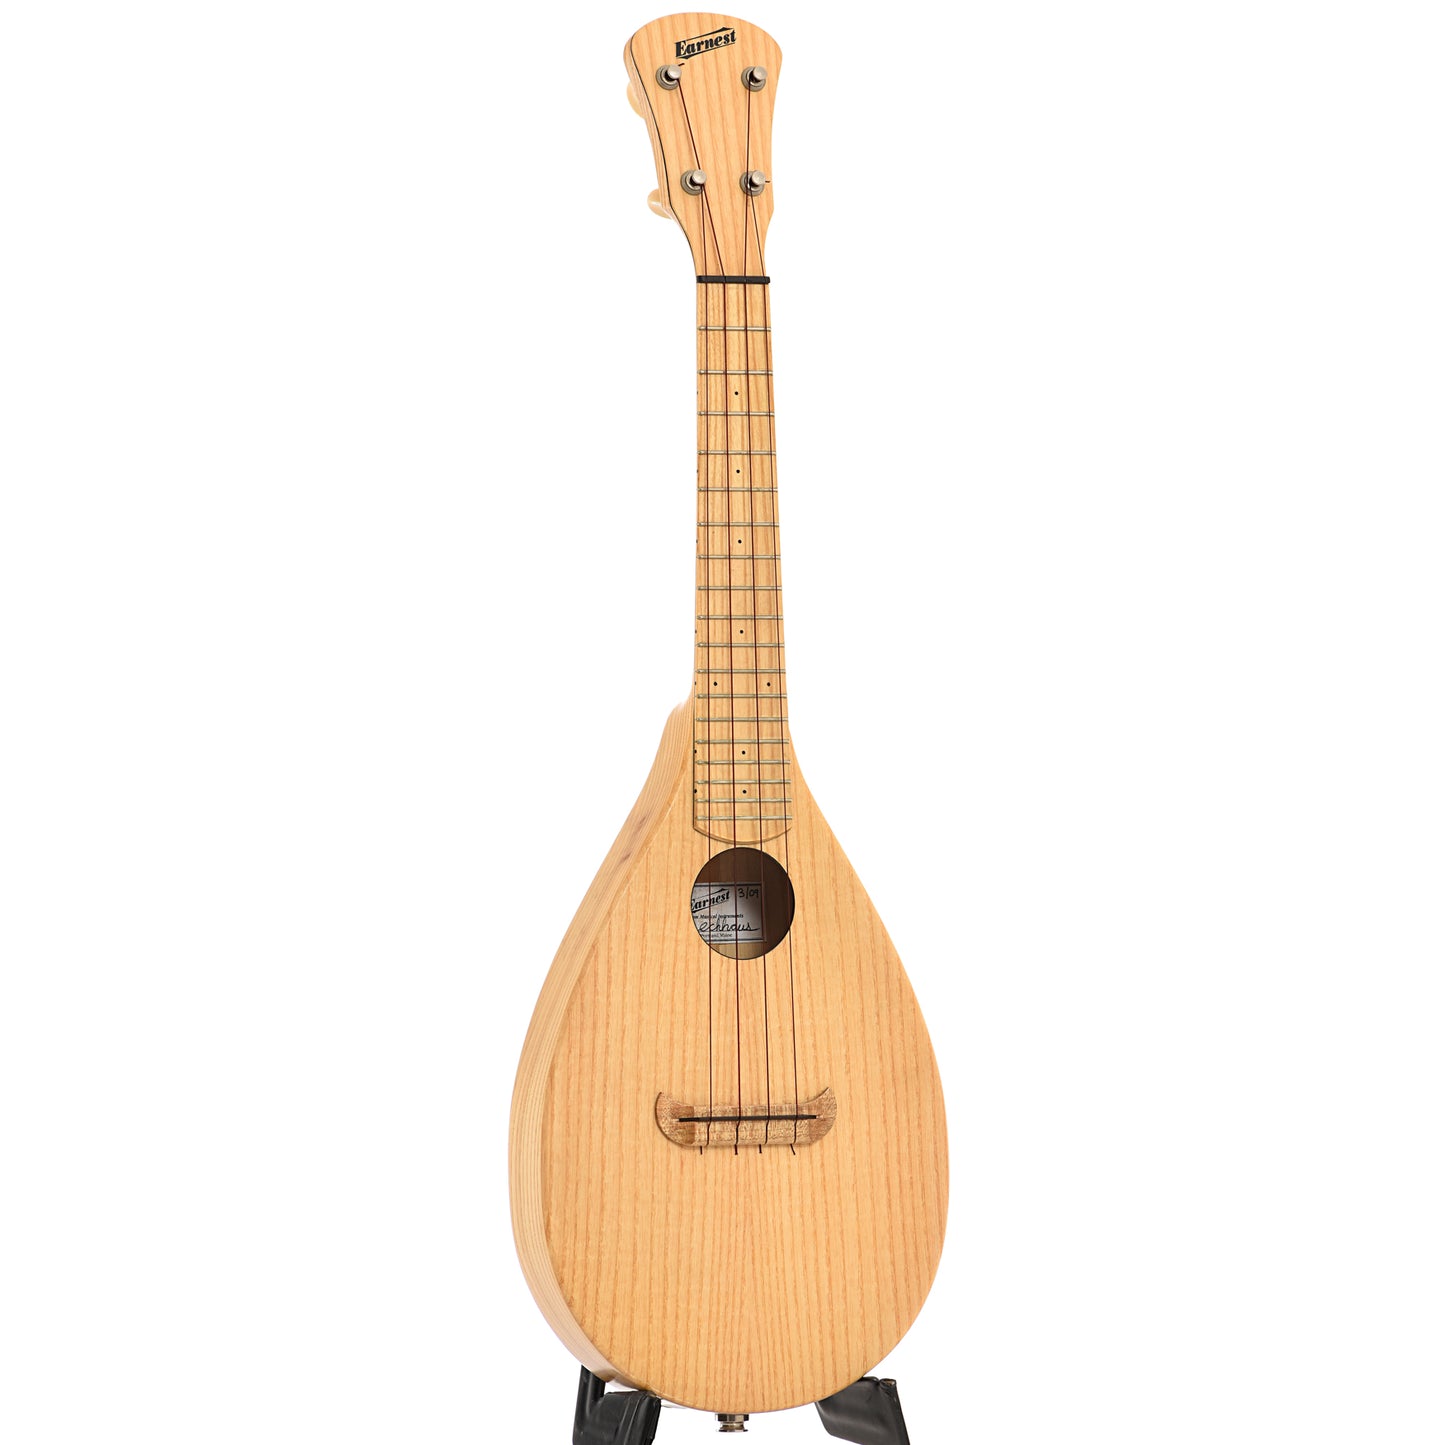 Full front and side of Earnest Tenor Paddlelele